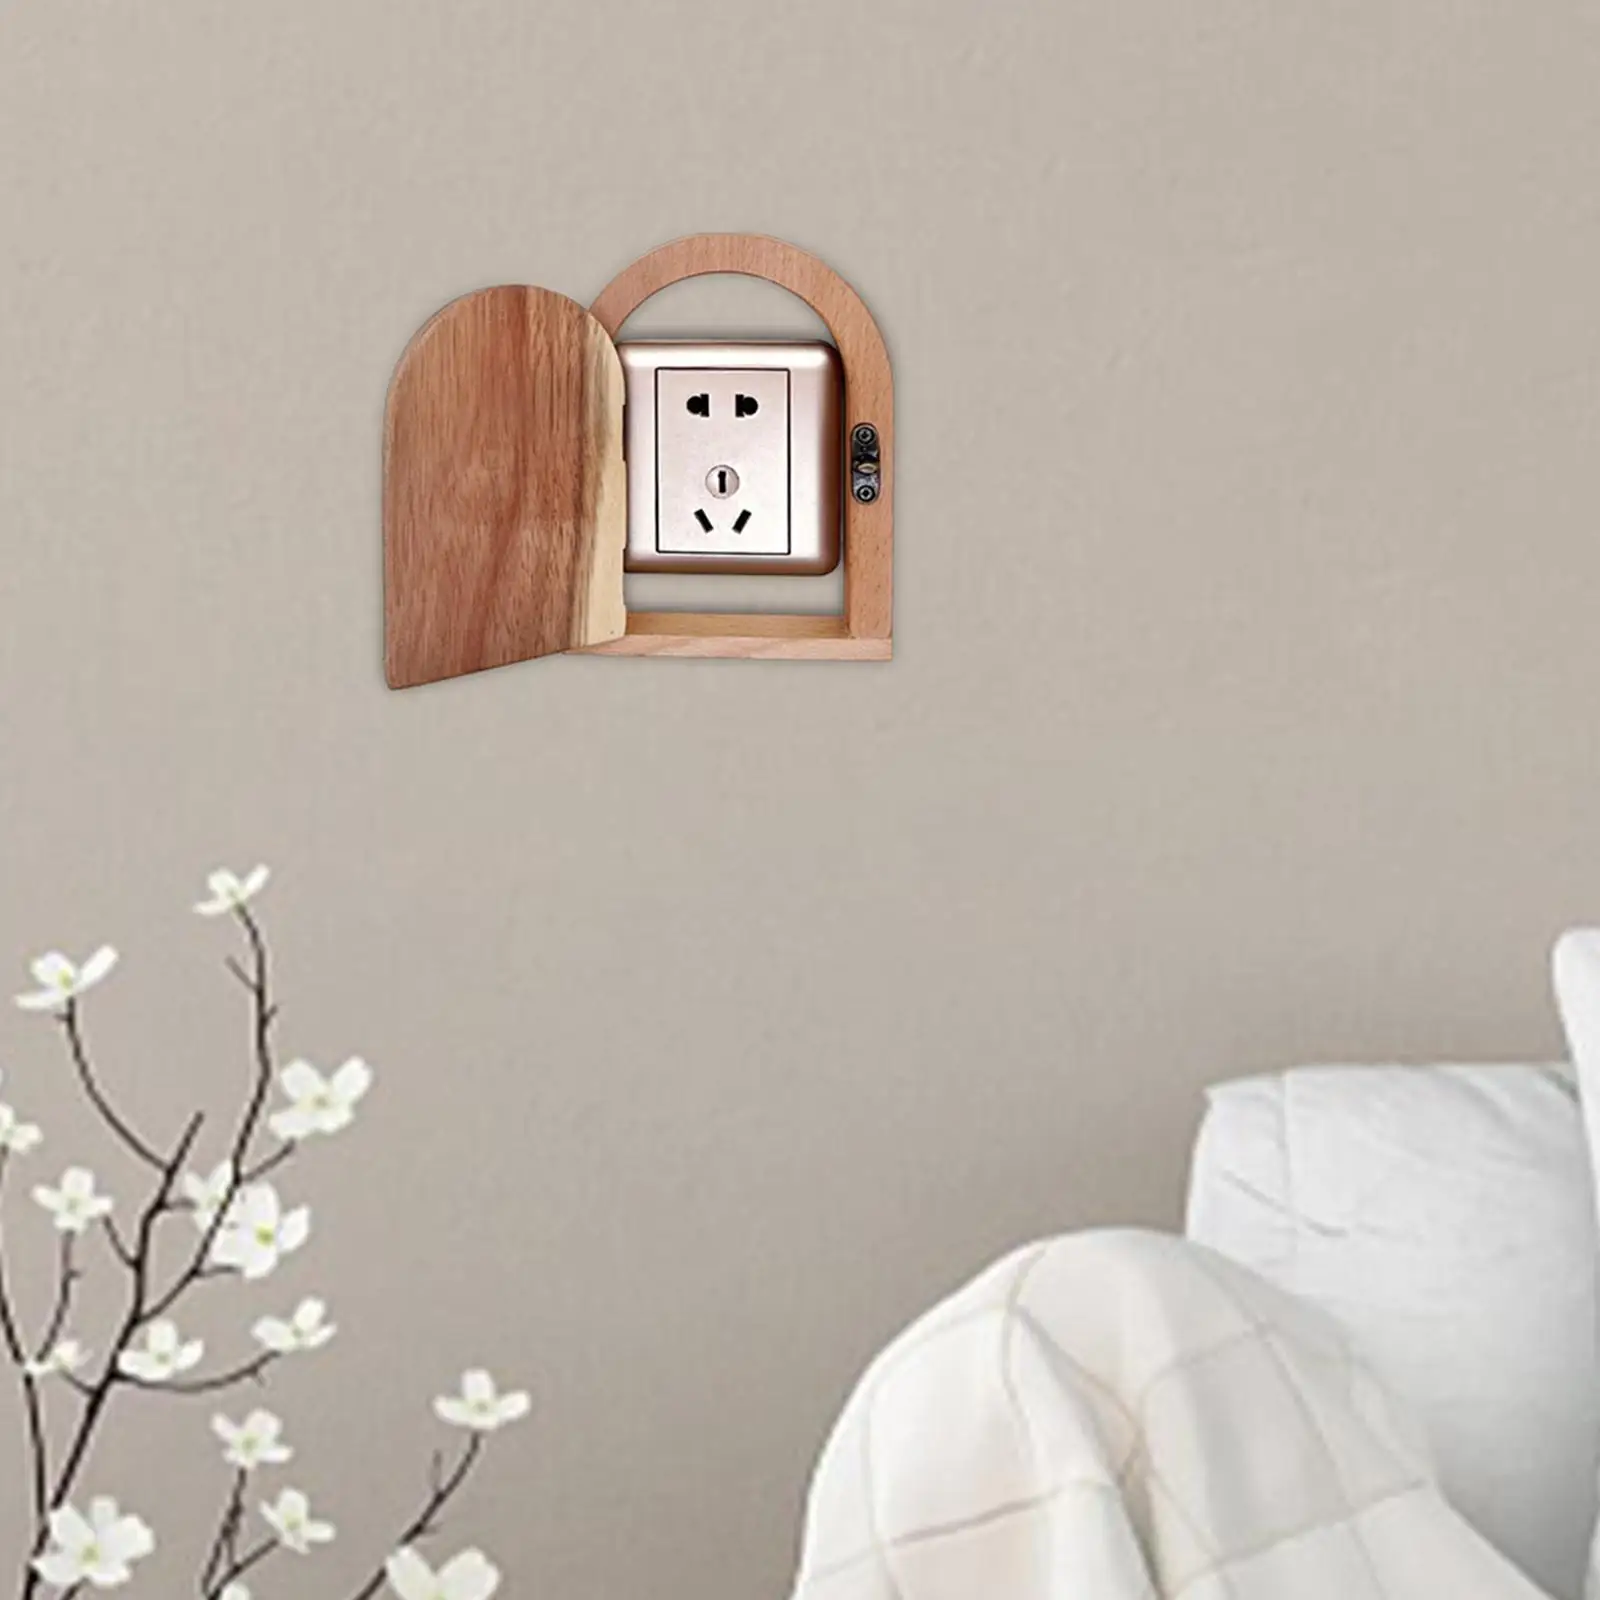 Electrical Outlet Cover Wood Switch Box Dustproof Easy to Install Socket Cover for Living Room Outdoor Kitchen Bedroom Office